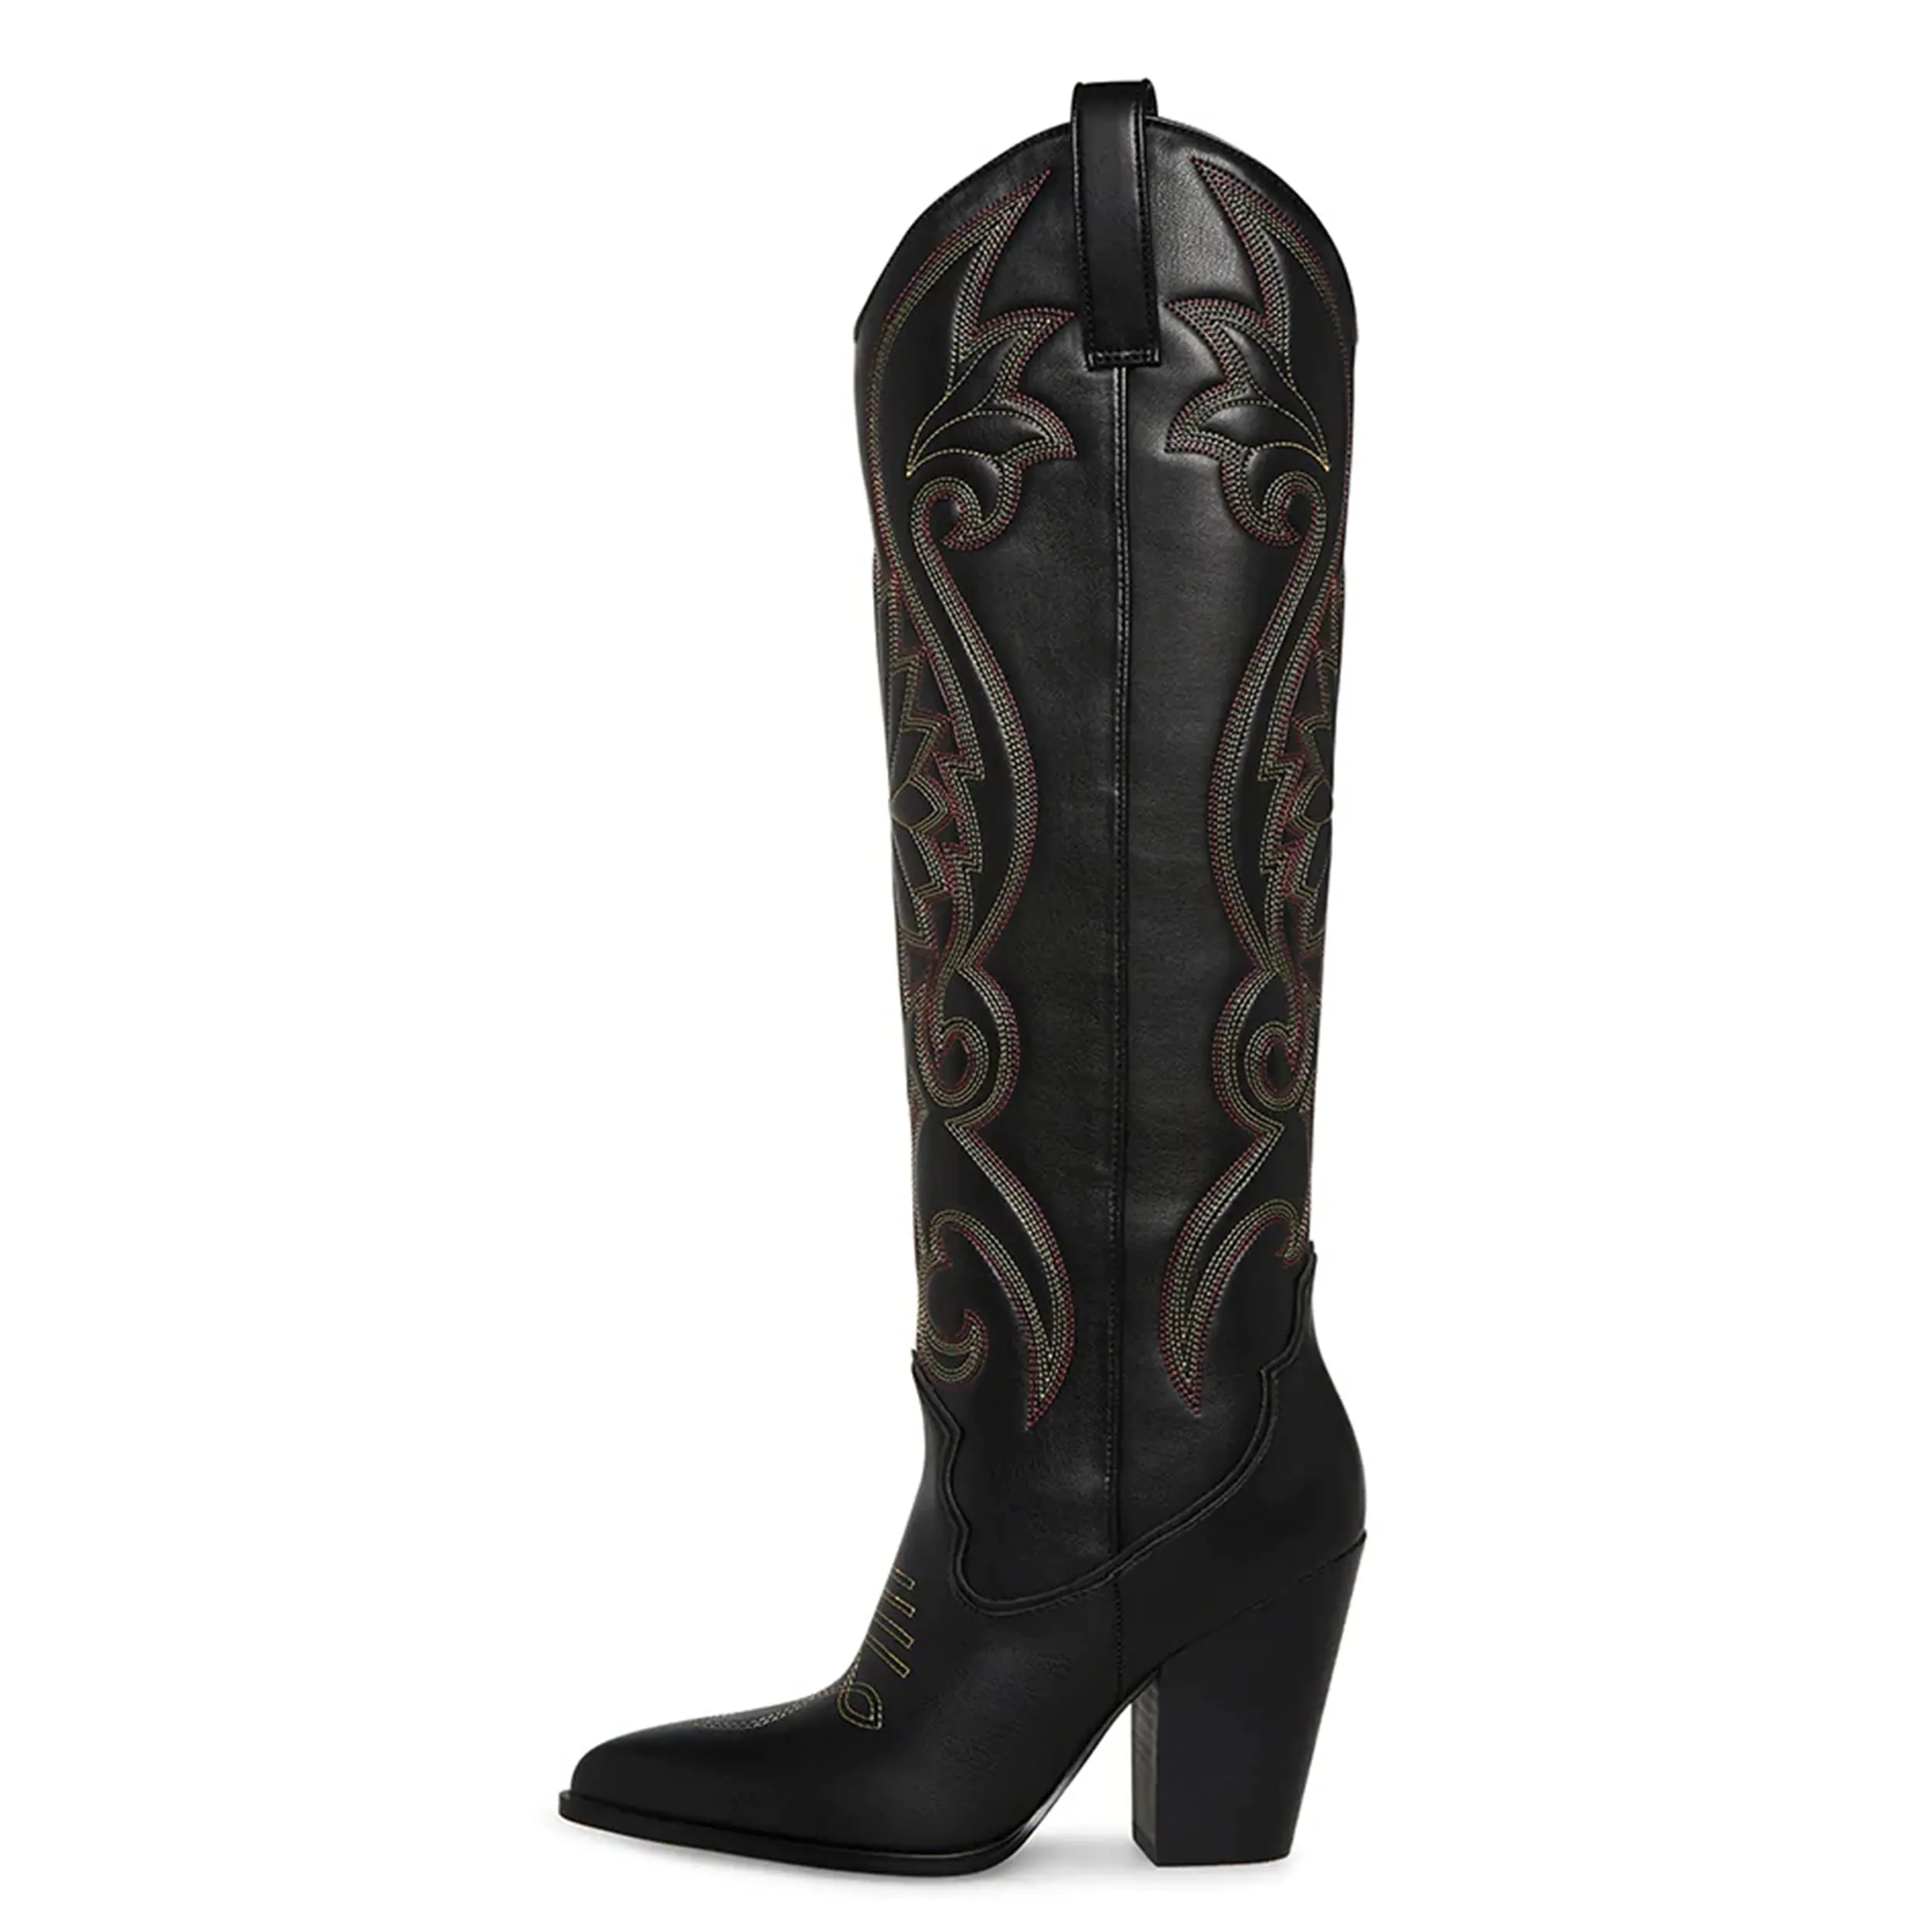 Retro Embroidery Wide Boots Western Style Women's Wedge Heel Knee High Boots High Heel western cowboy boots women